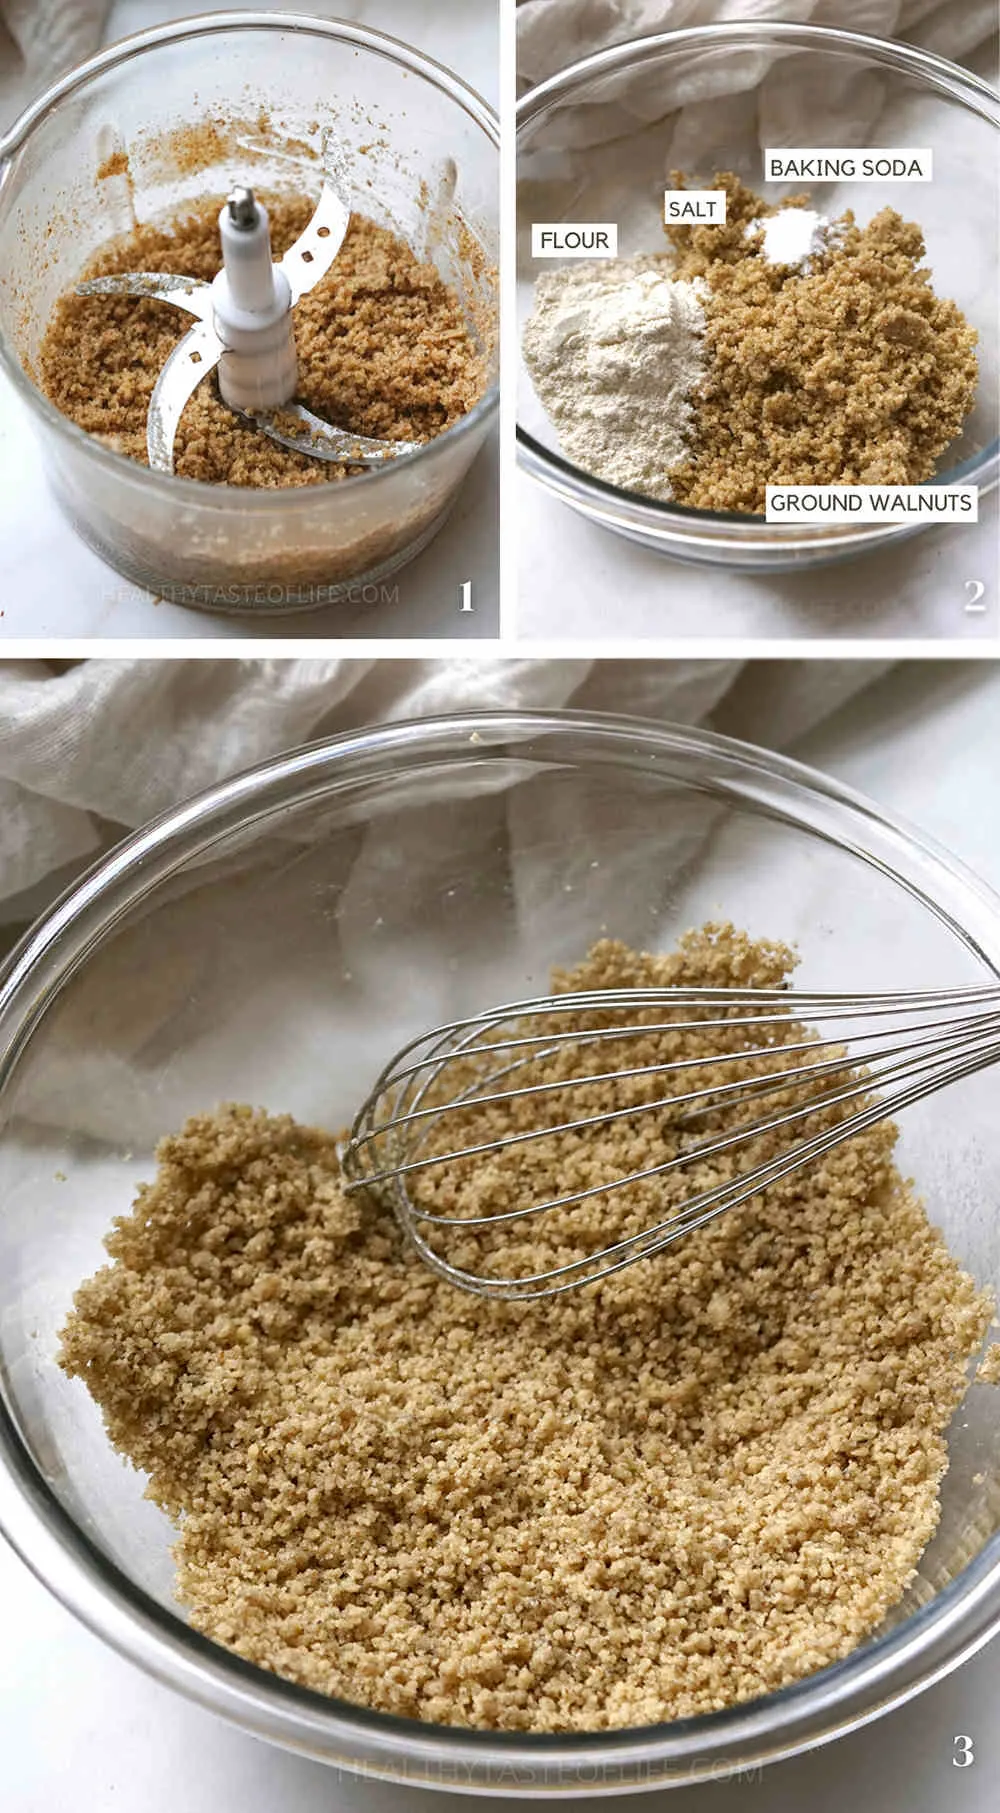 Process shots showing how to mix dry ingredients  when making a cake with walnuts.